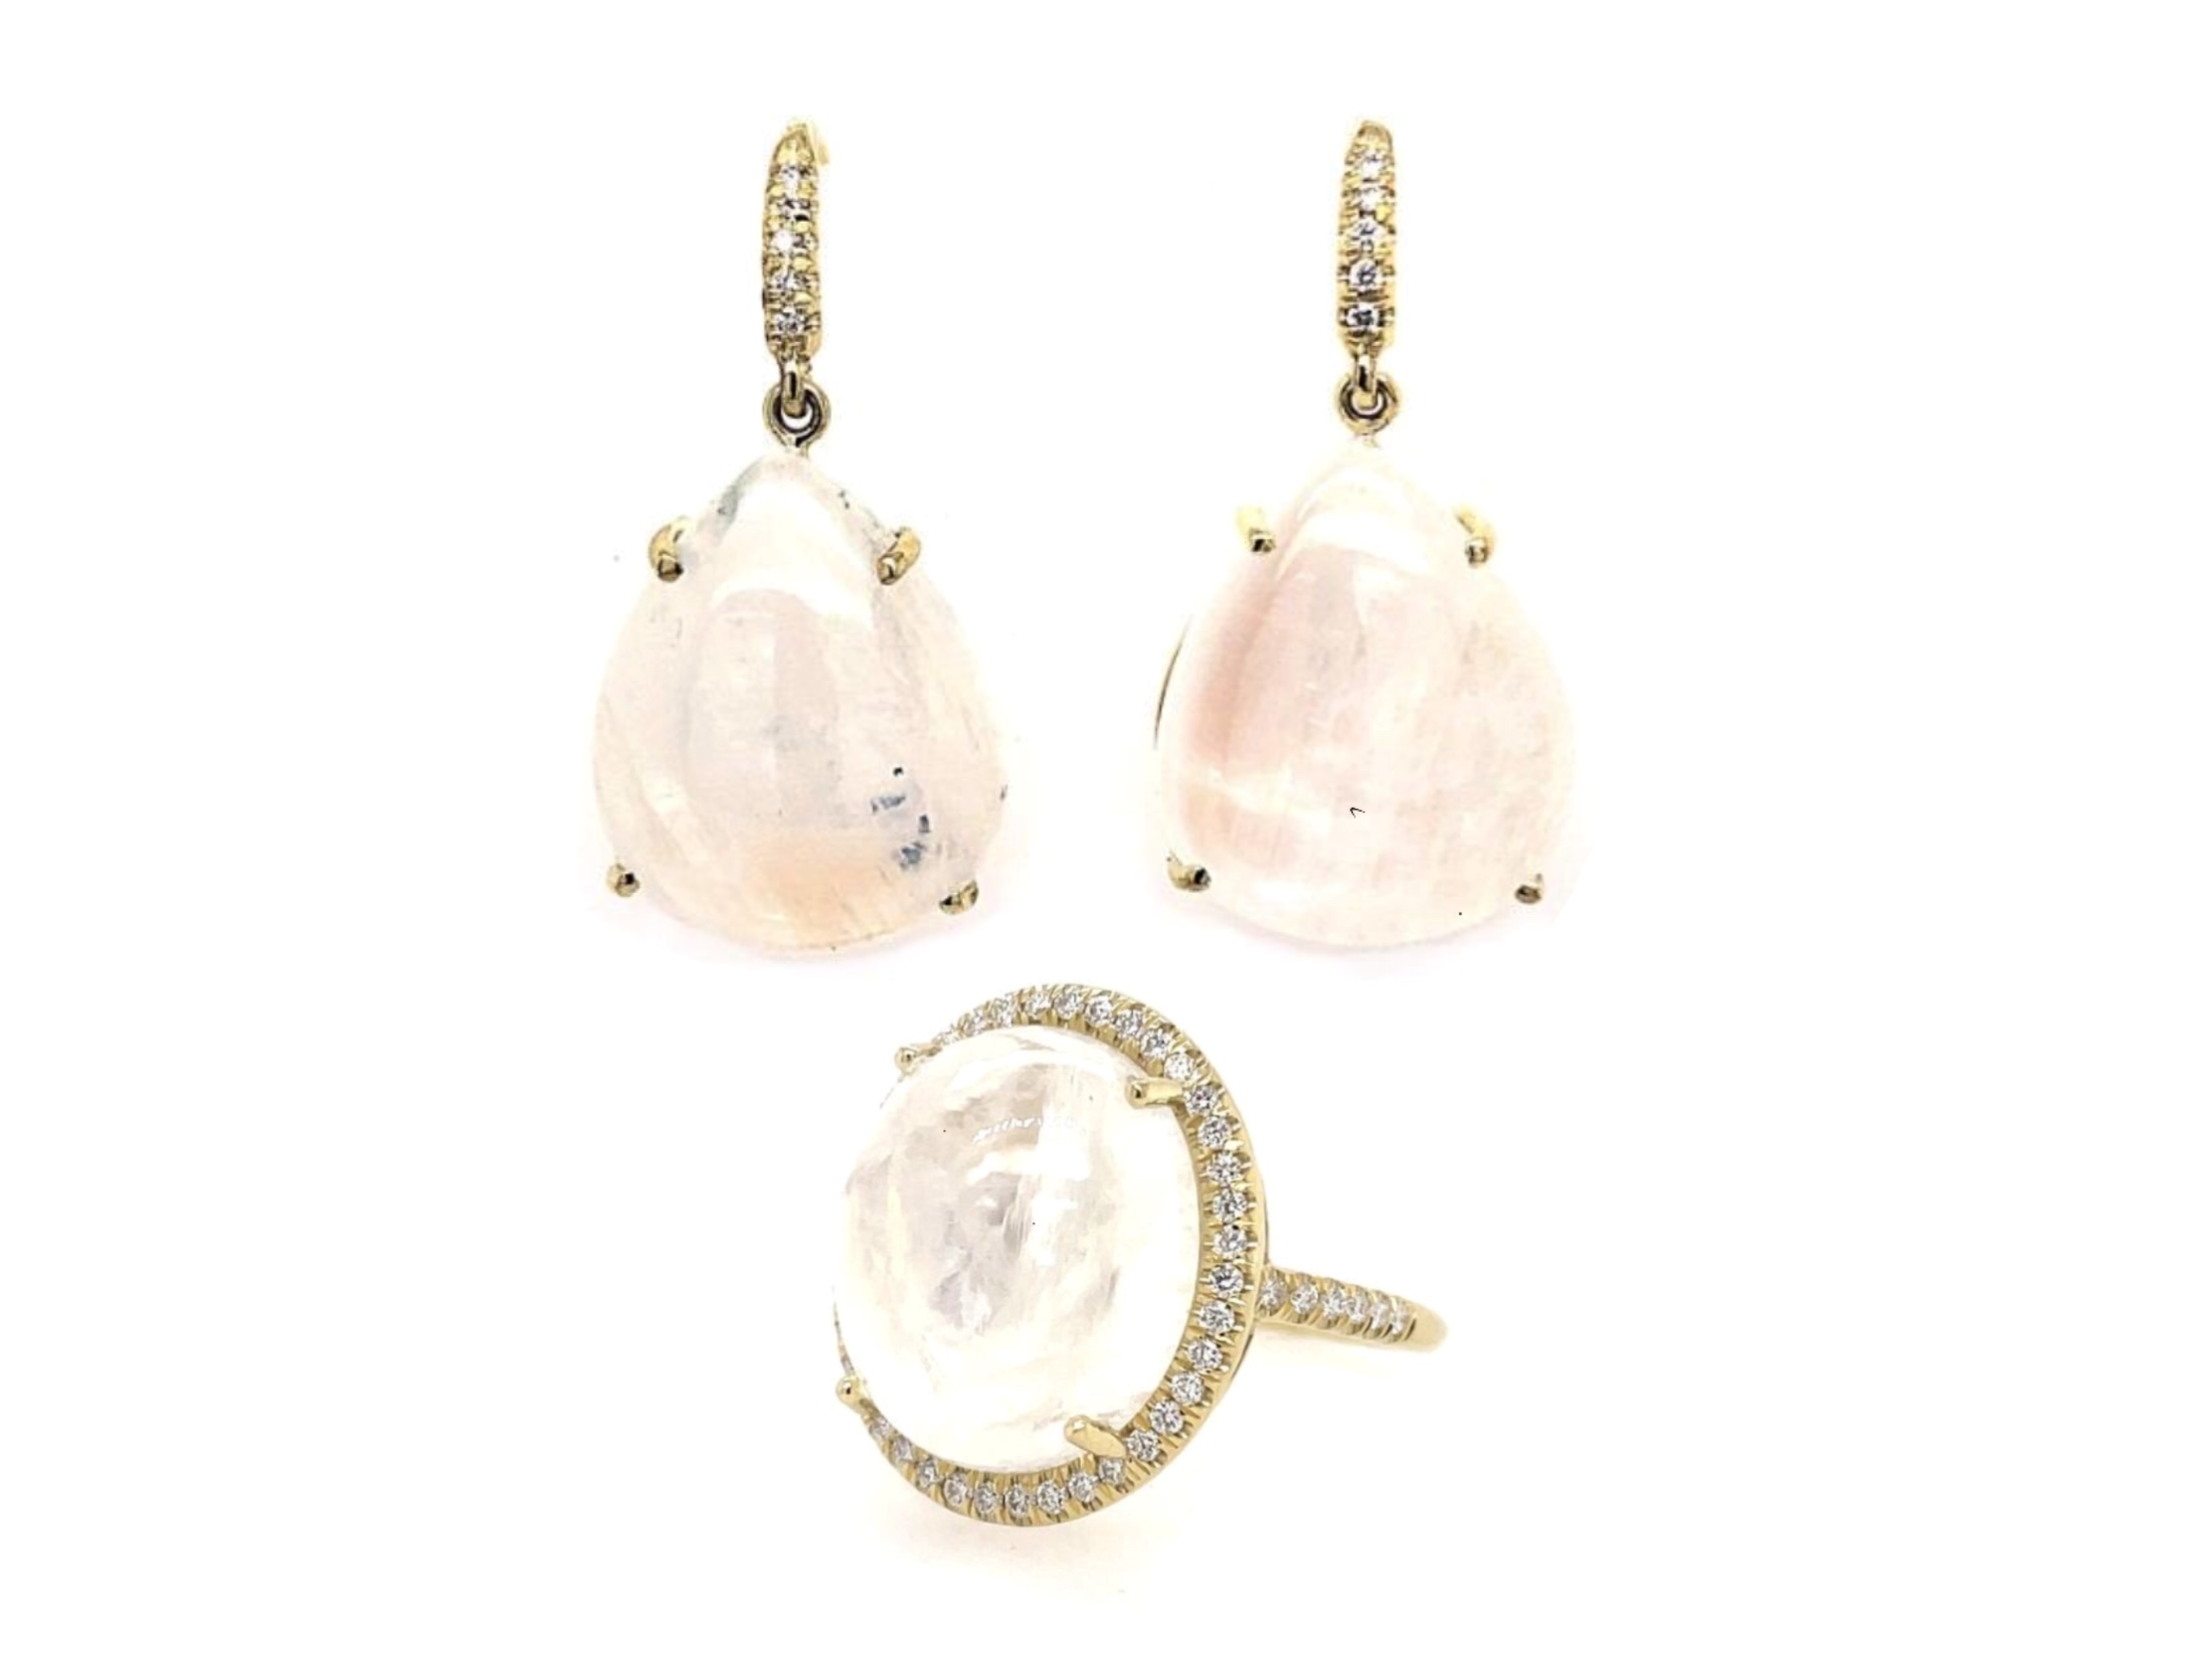 Luminescent Pear Shaped Cabochon Moonstone Earrings by Lauren K and Oval Cabochon Moonstone Misha Ring by Lauren K, available at Deutsch Fine Jewelry in Houston, Texas.